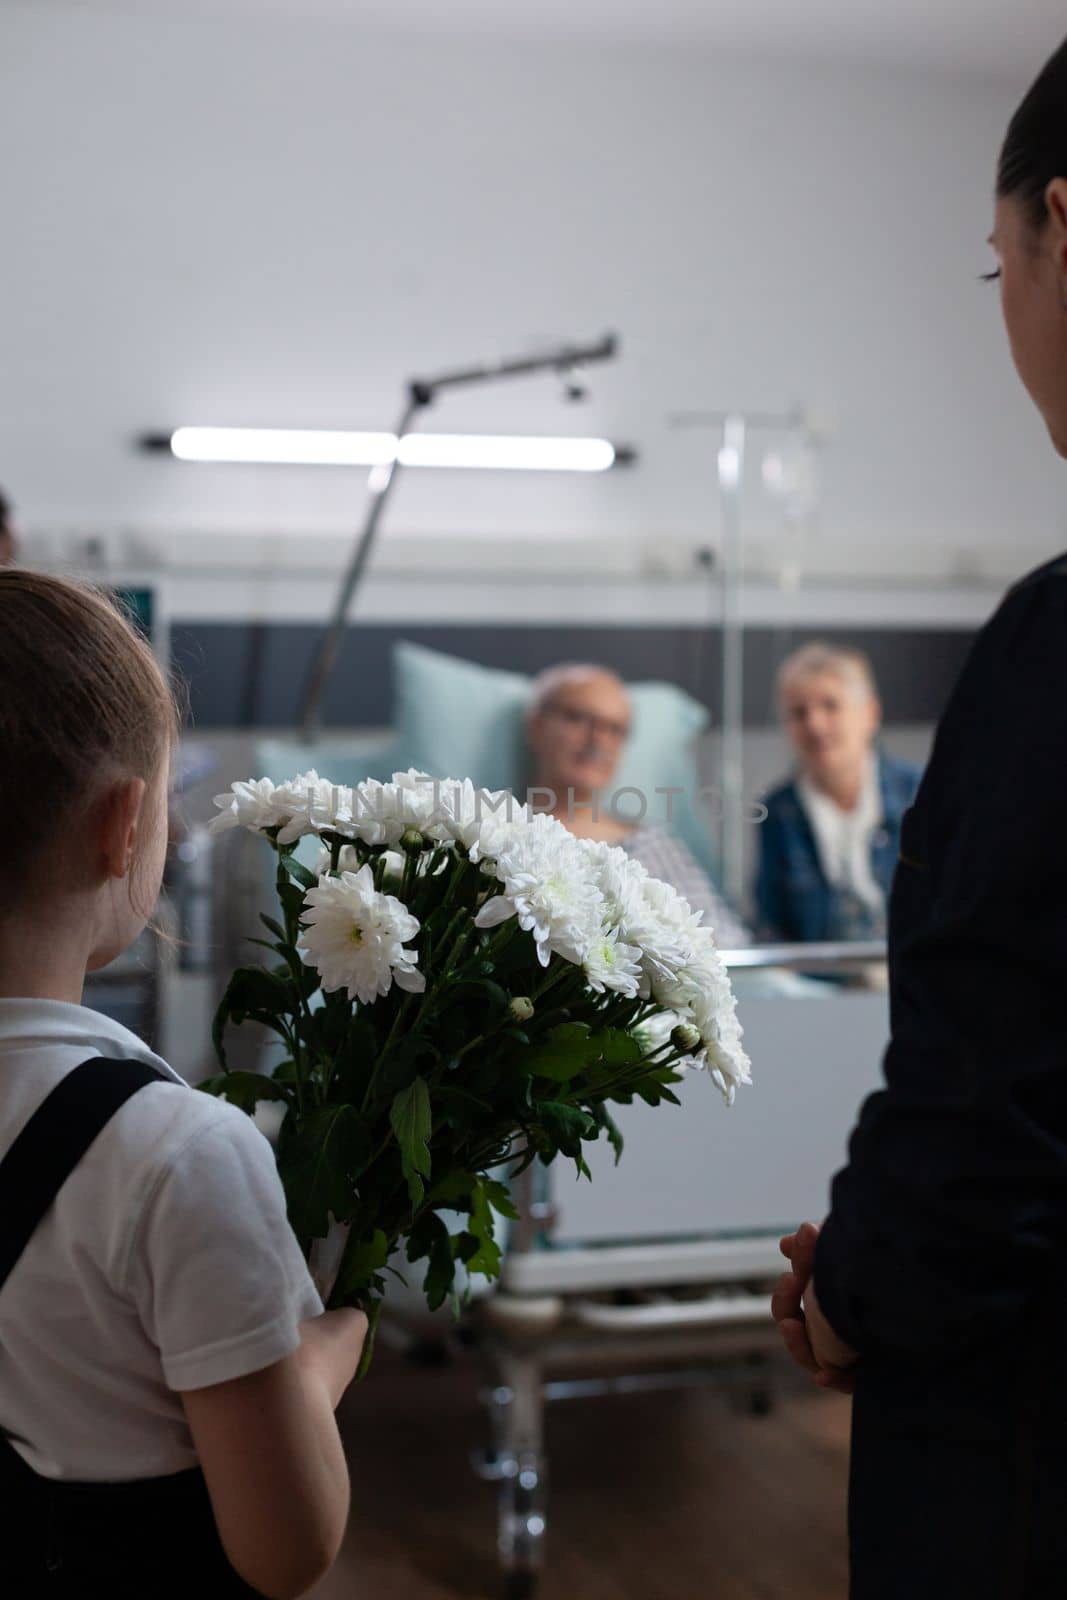 Girl carrying flowers gift to grandfather lying in hospital bed by DCStudio